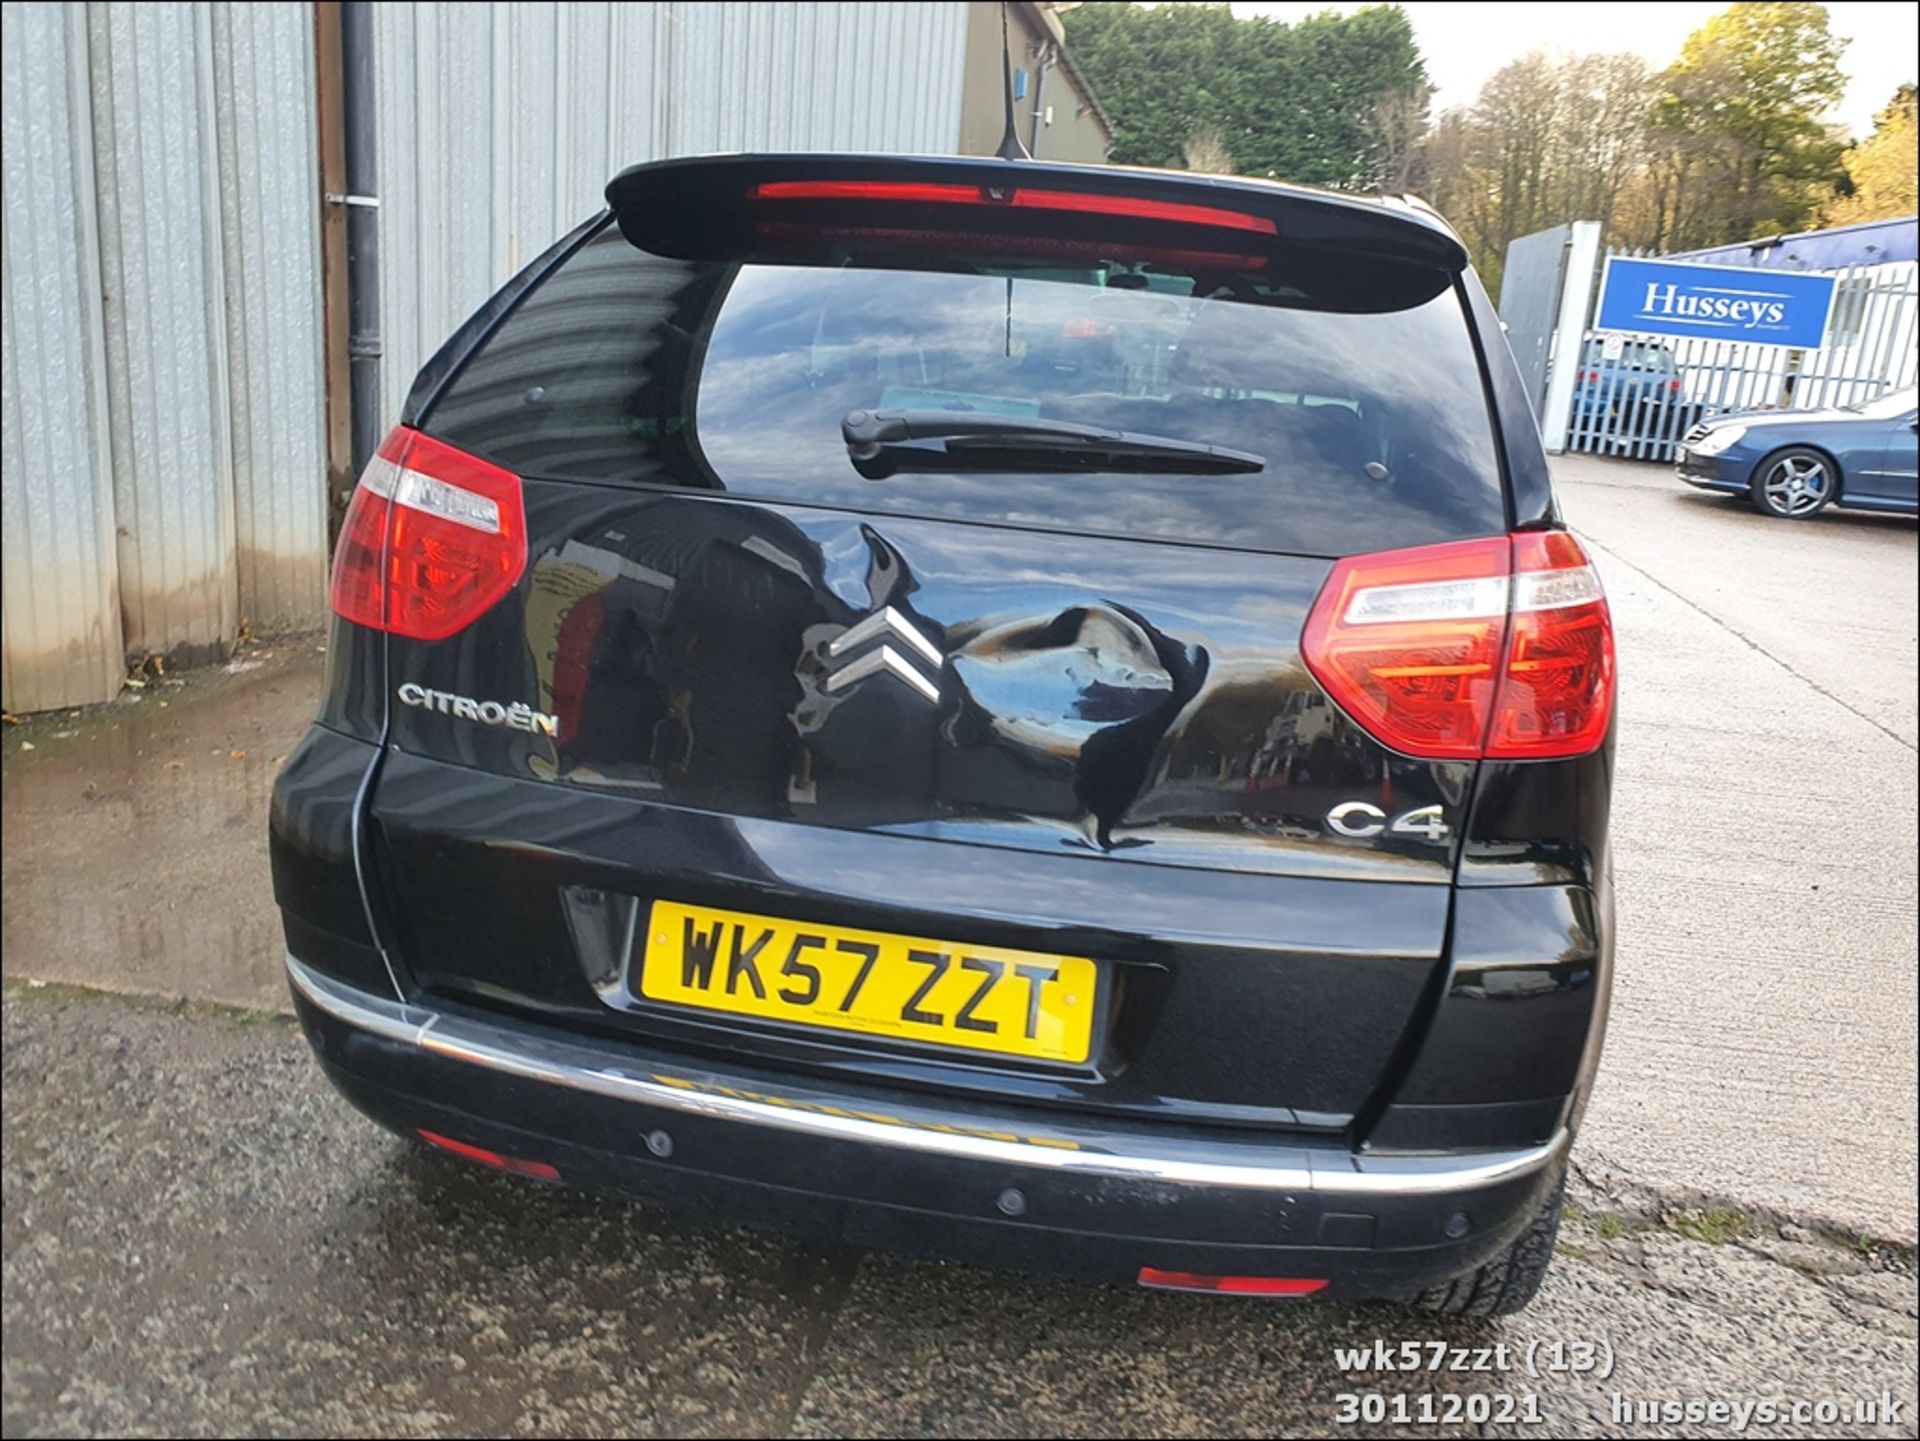 07/57 CITROEN C4 PICASSO 5 EXCL HDI EGS - 1560cc 5dr MPV (Black, 120k) - Image 13 of 29